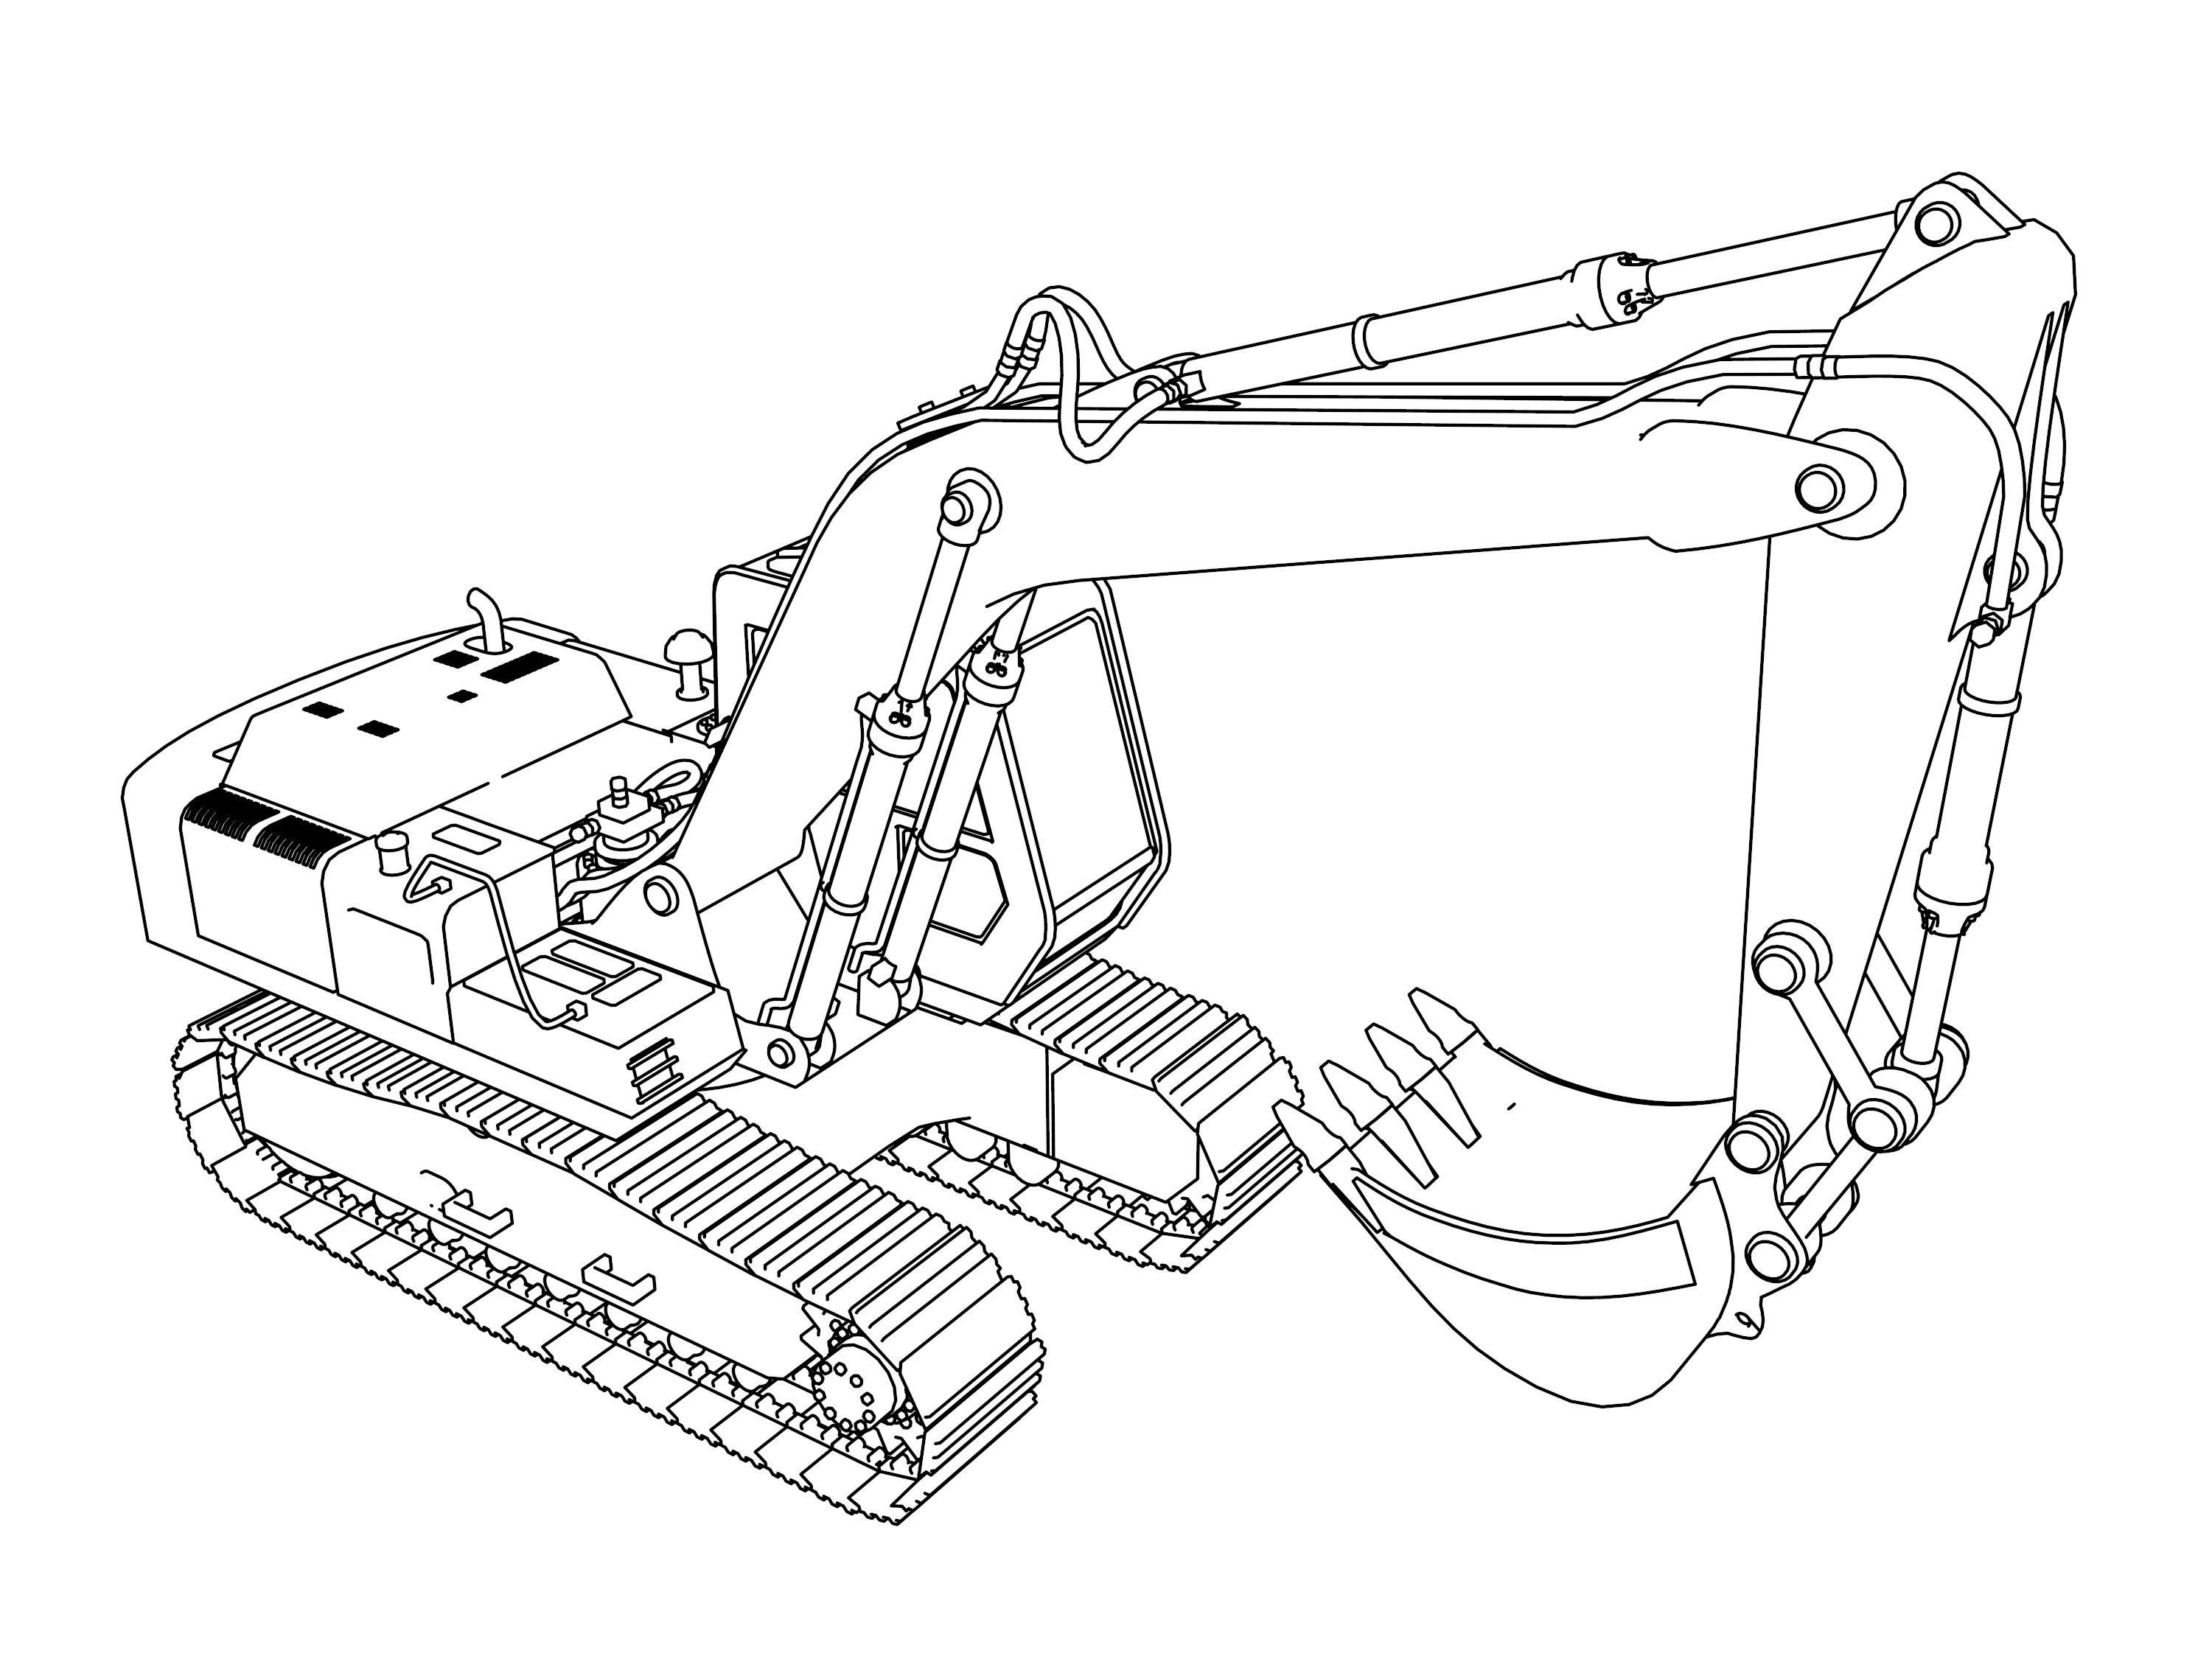 Excavators Coloring Pages   Coloring Home